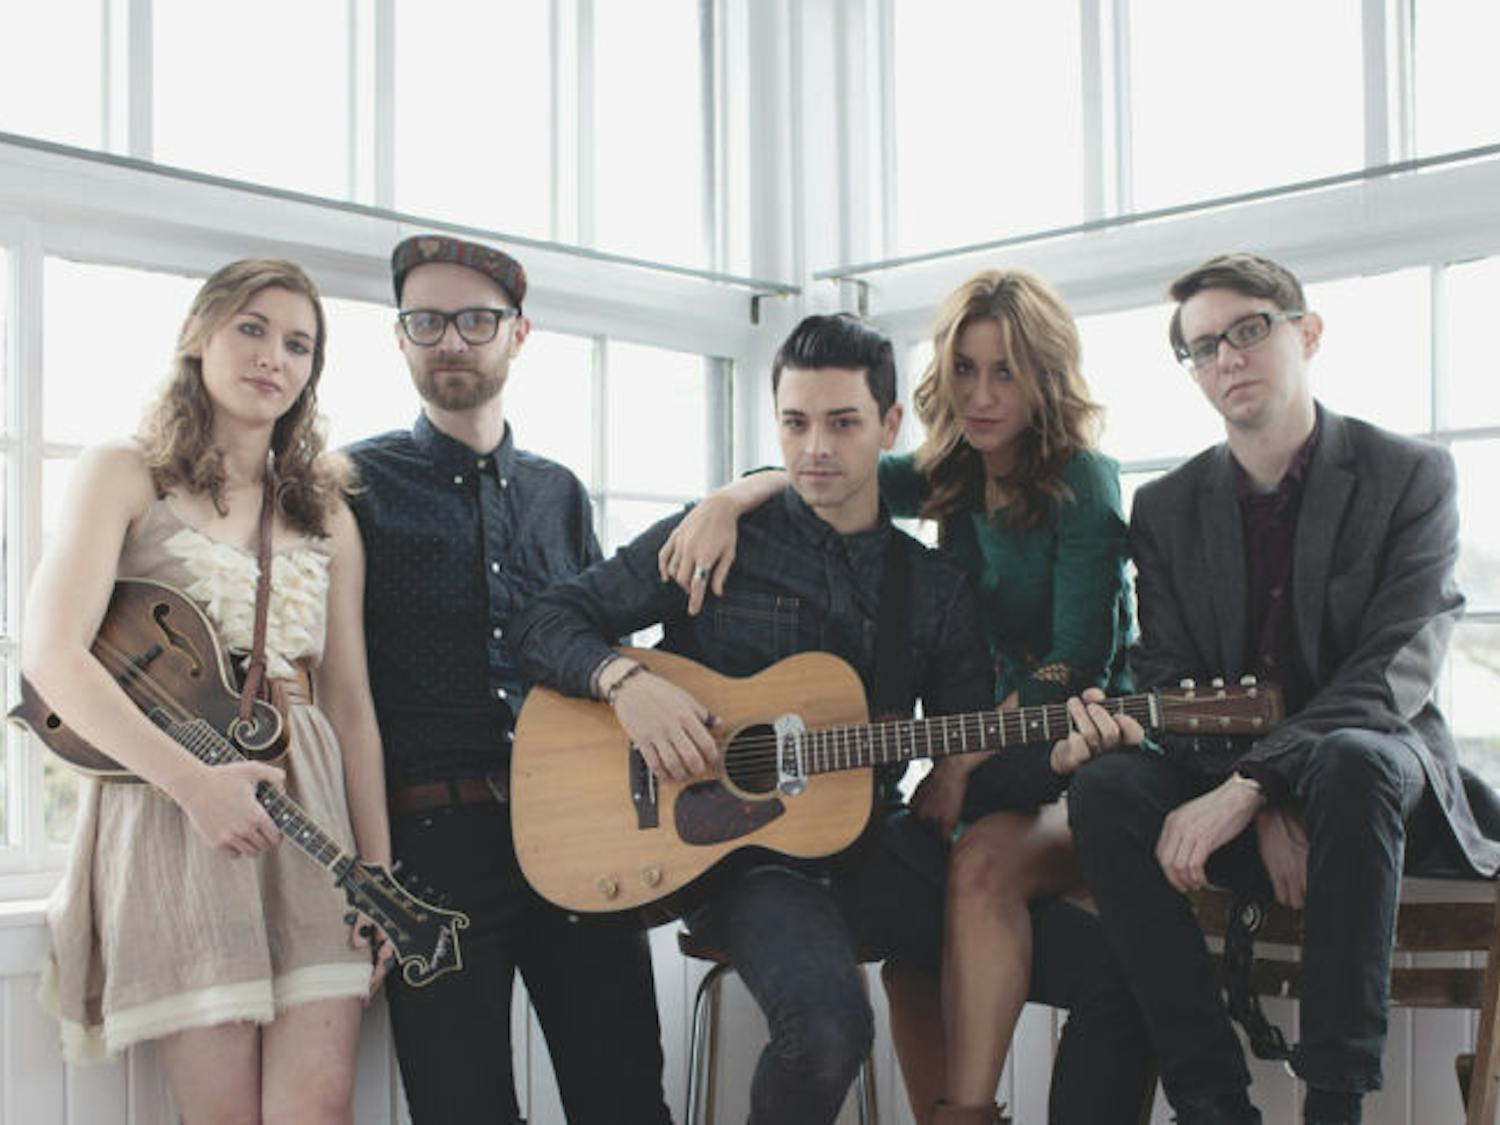 Twin Forks, a folk-punk outfit fronted by former Dashboard Confessional lead, Chris Carrabba, will play at 1982 next Thursday. Tickets are $12 in advance or $14 at the door.&nbsp;
&nbsp;